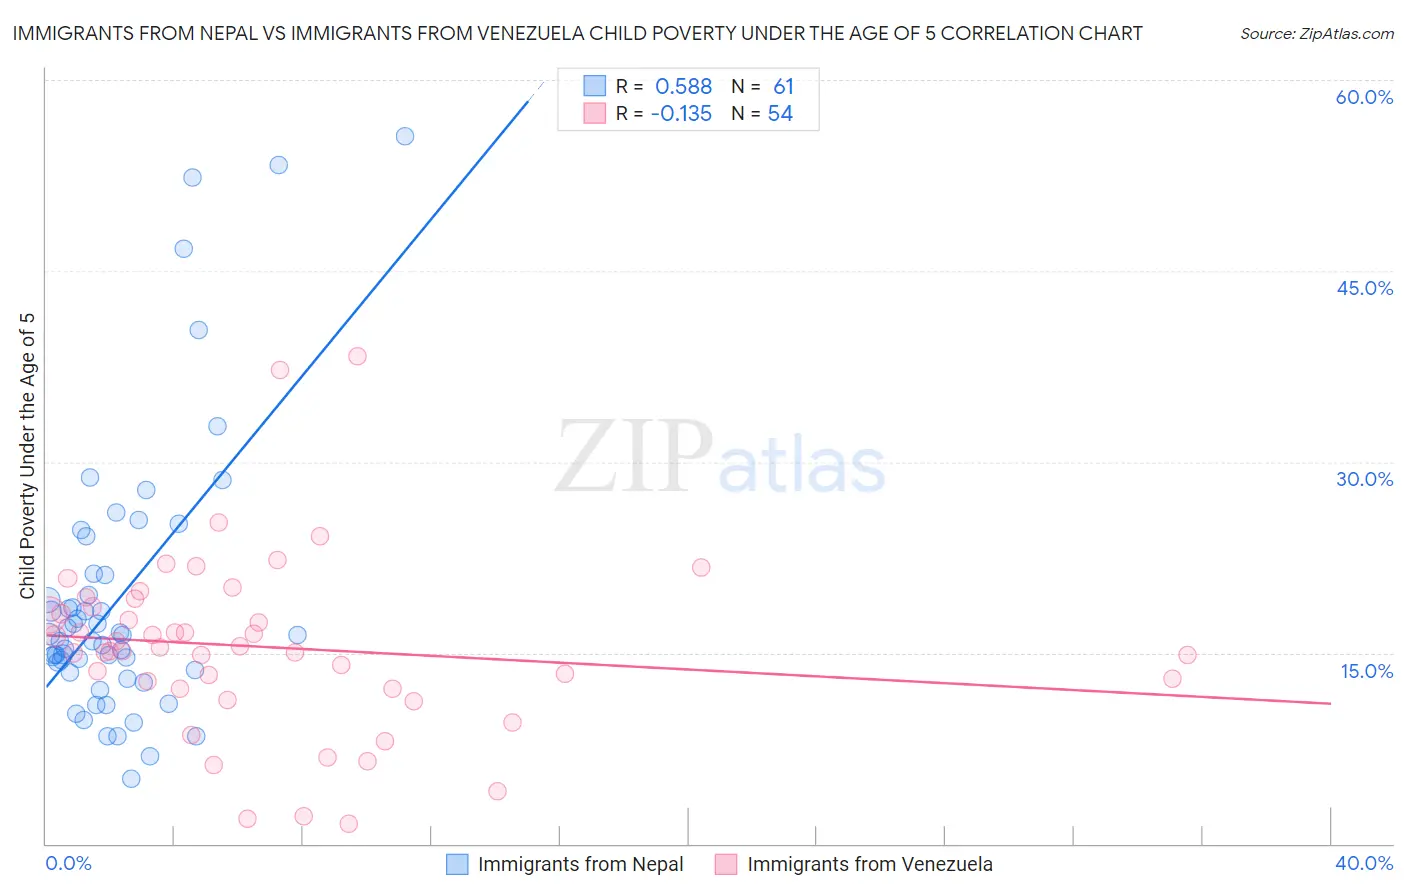 Immigrants from Nepal vs Immigrants from Venezuela Child Poverty Under the Age of 5